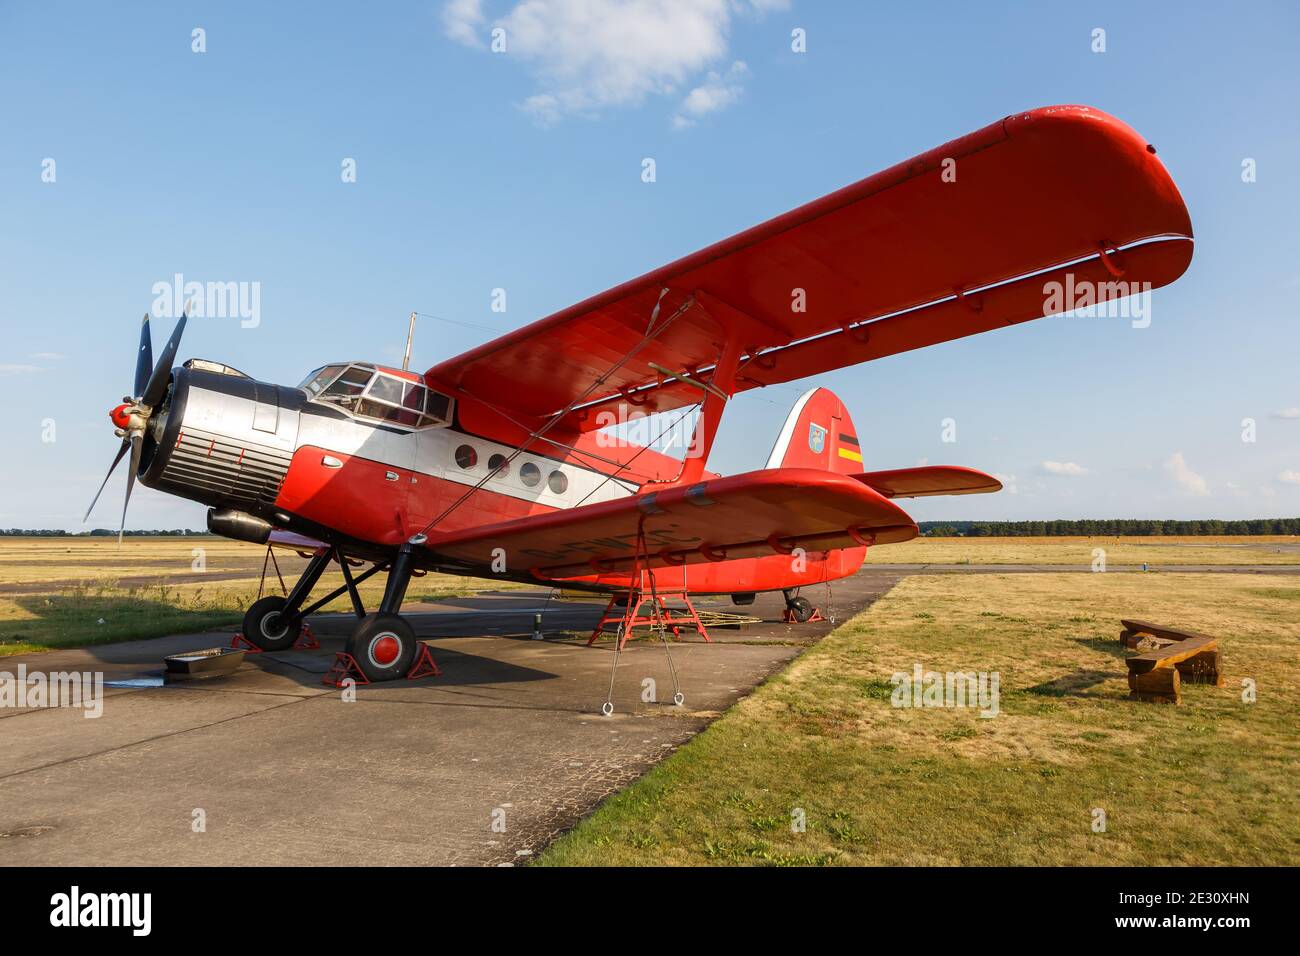 Strausberg, Germany - August 19, 2020: PZL-Mielec An-2T Antonow airplane at Strausberg airport in Germany. Stock Photo